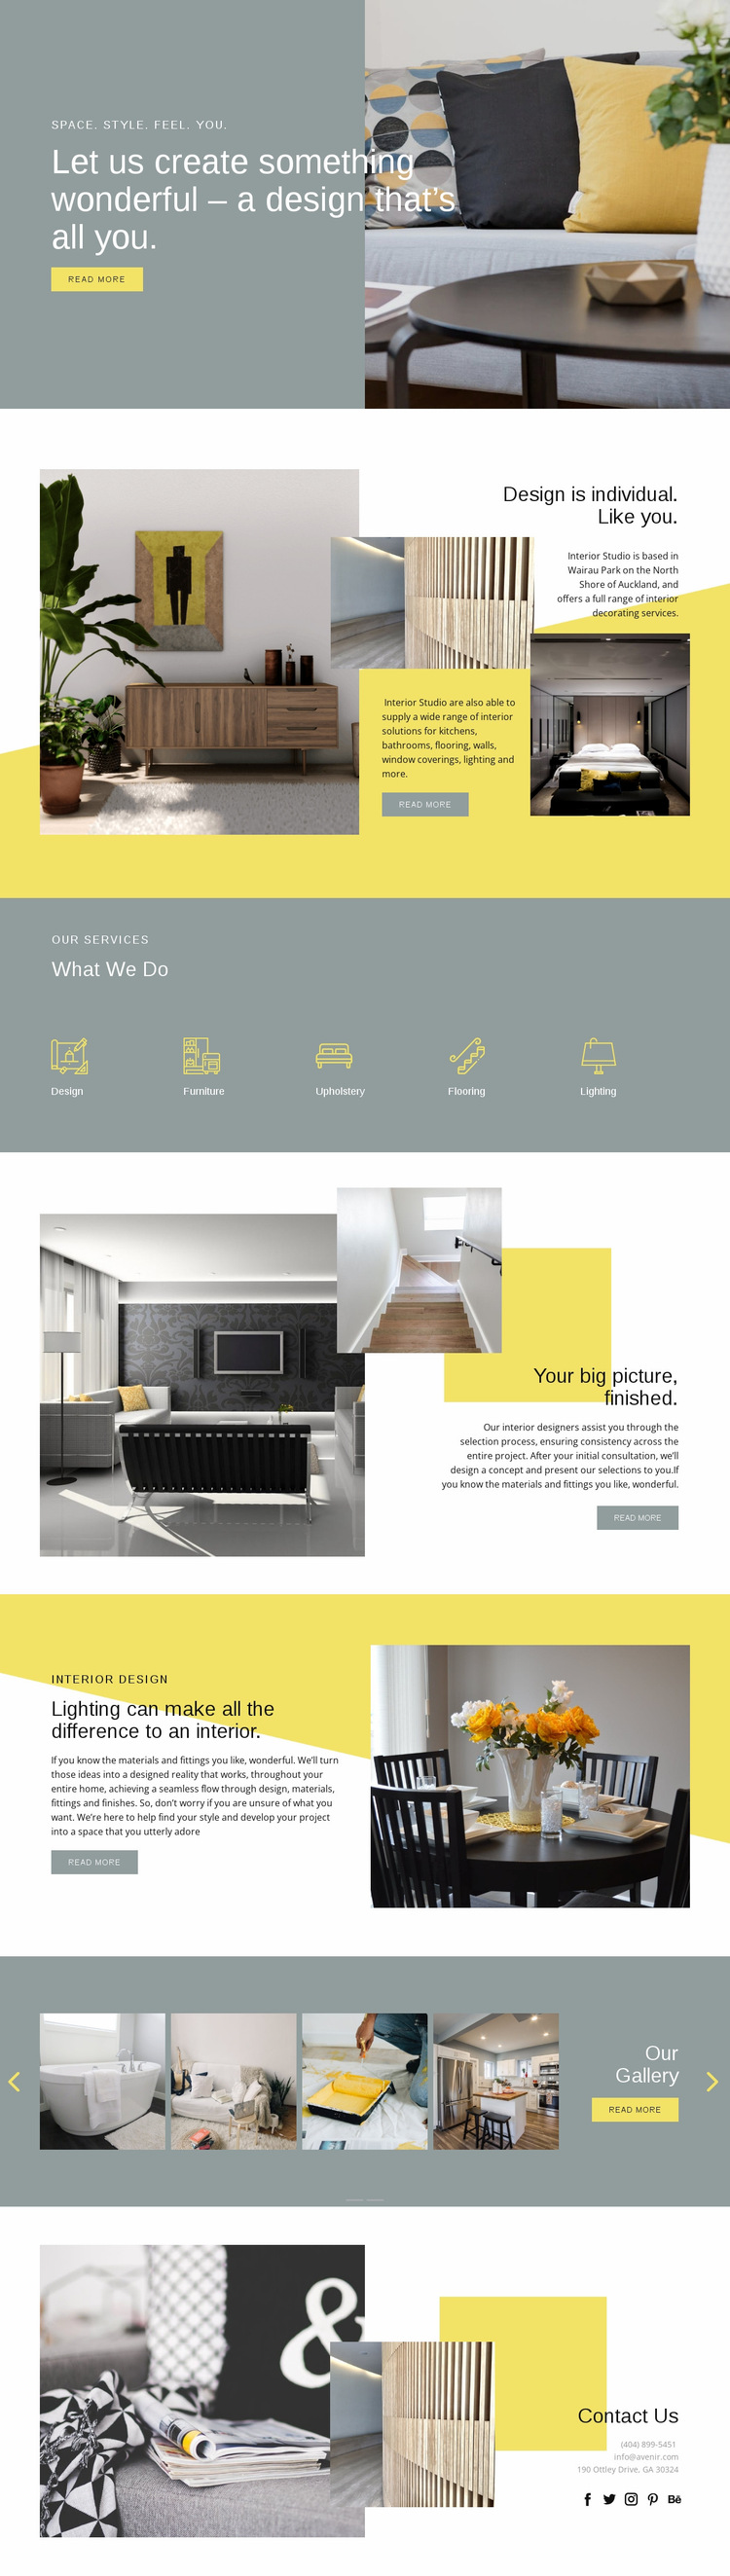 Design is your everything Website Builder Templates